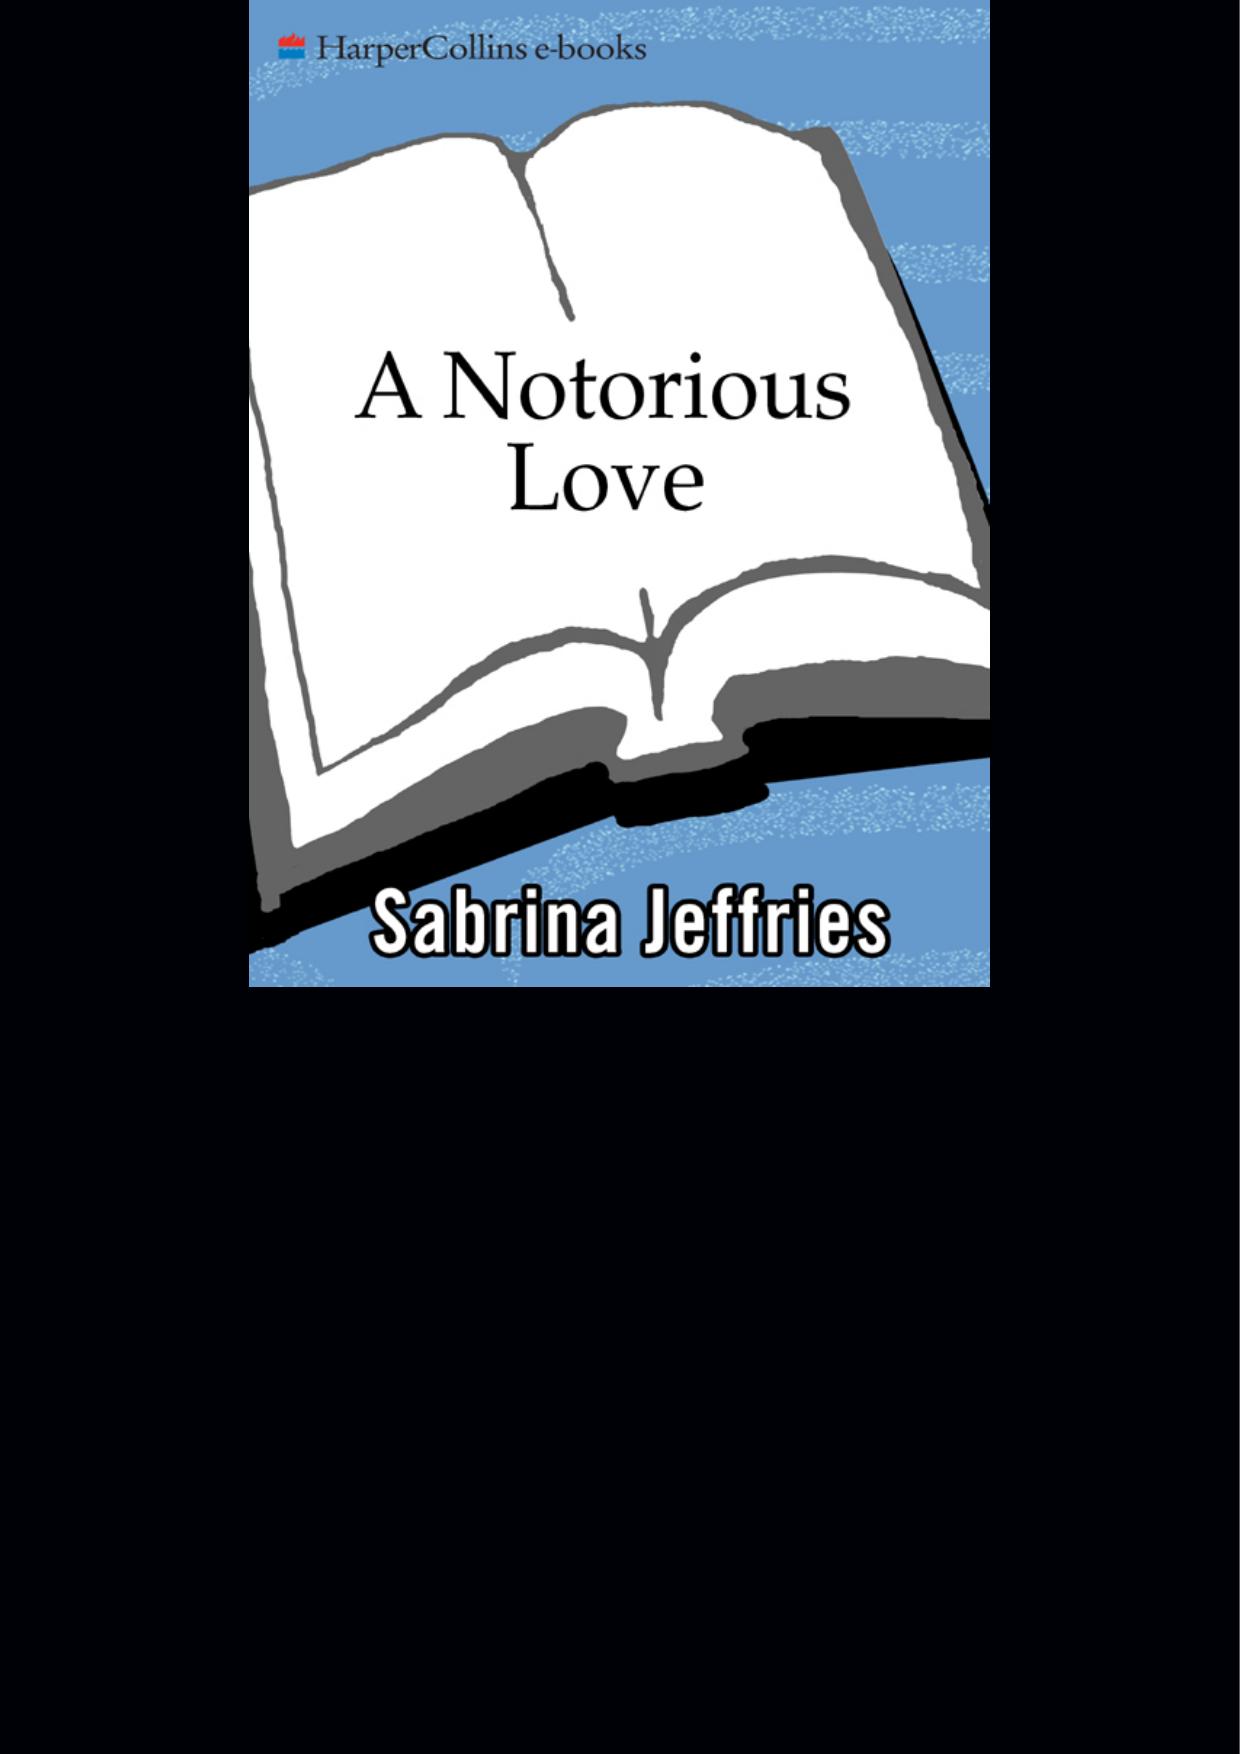 A Notorious Love